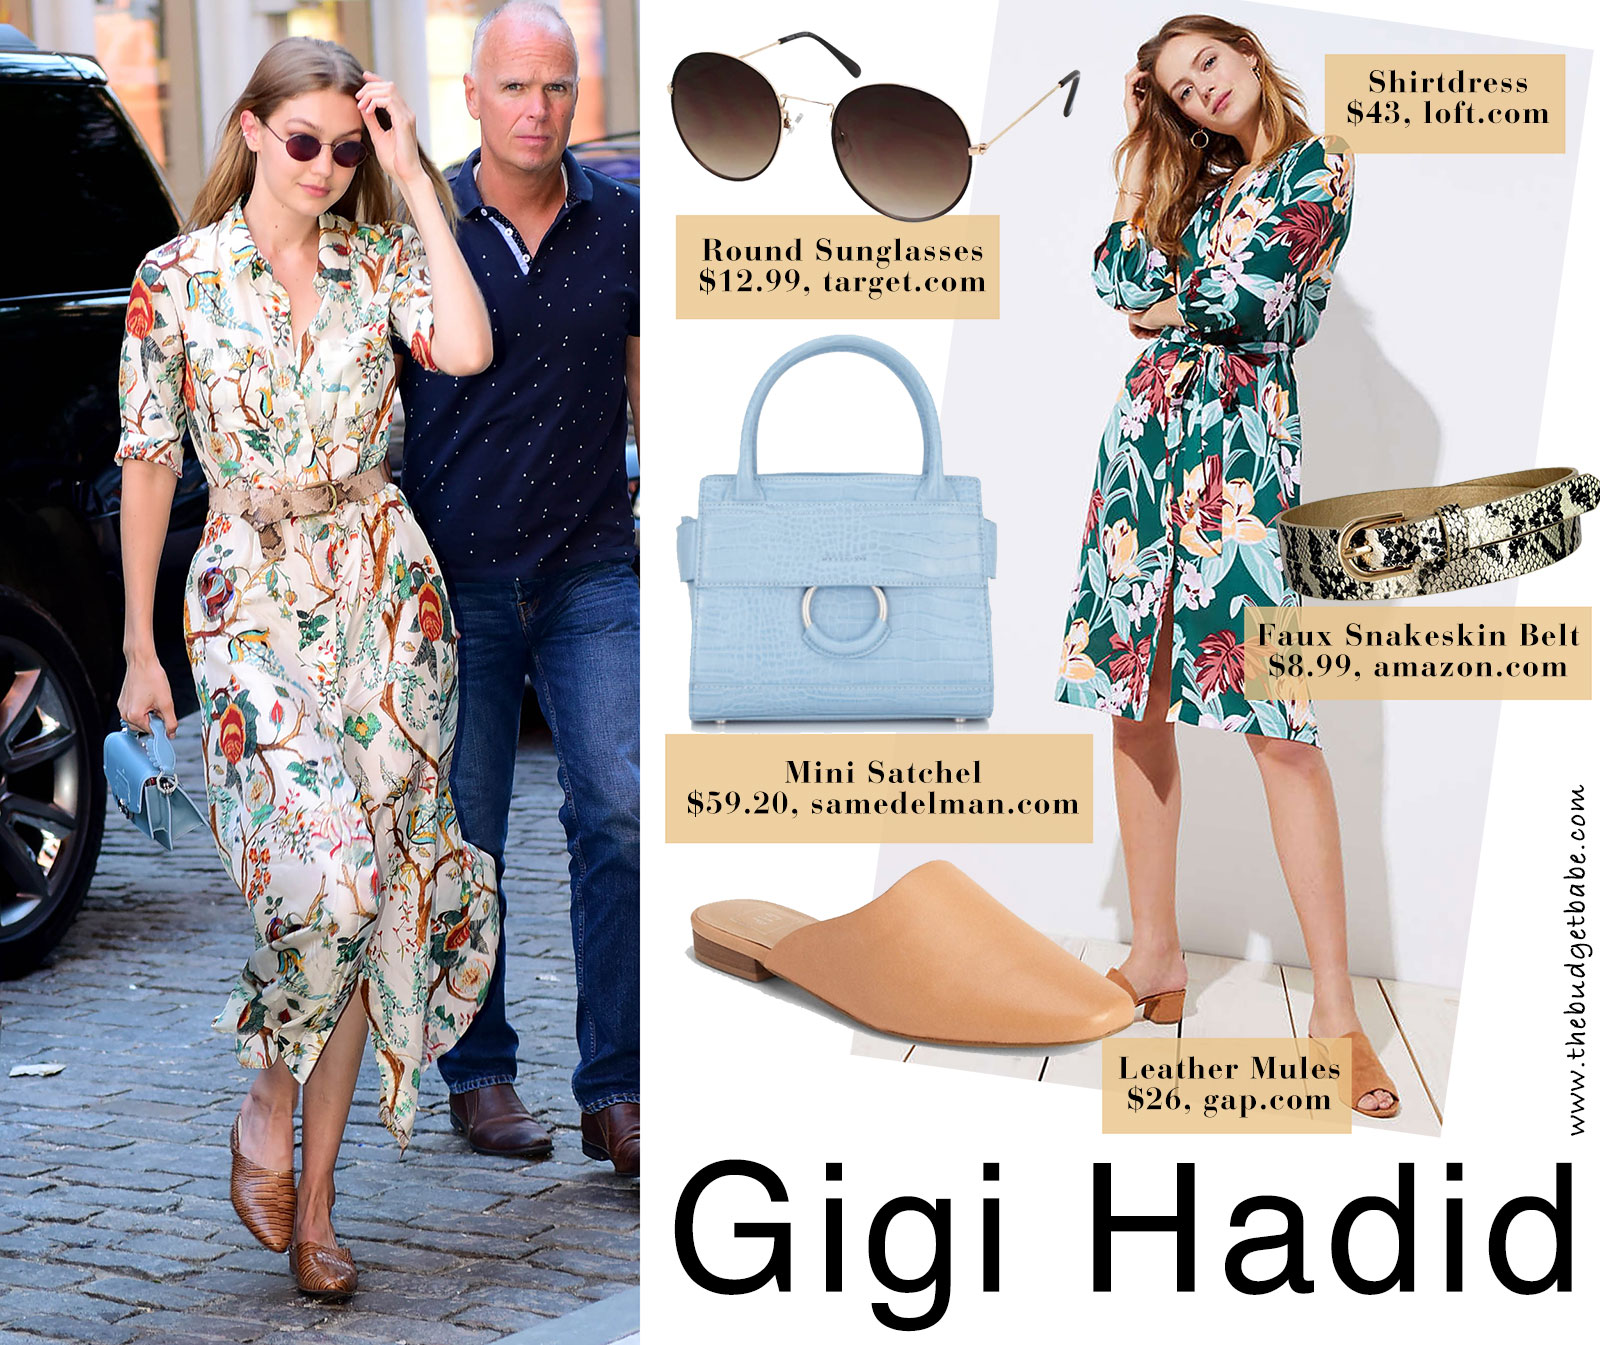 Gigi Hadid floral shirtdress and mules look for less